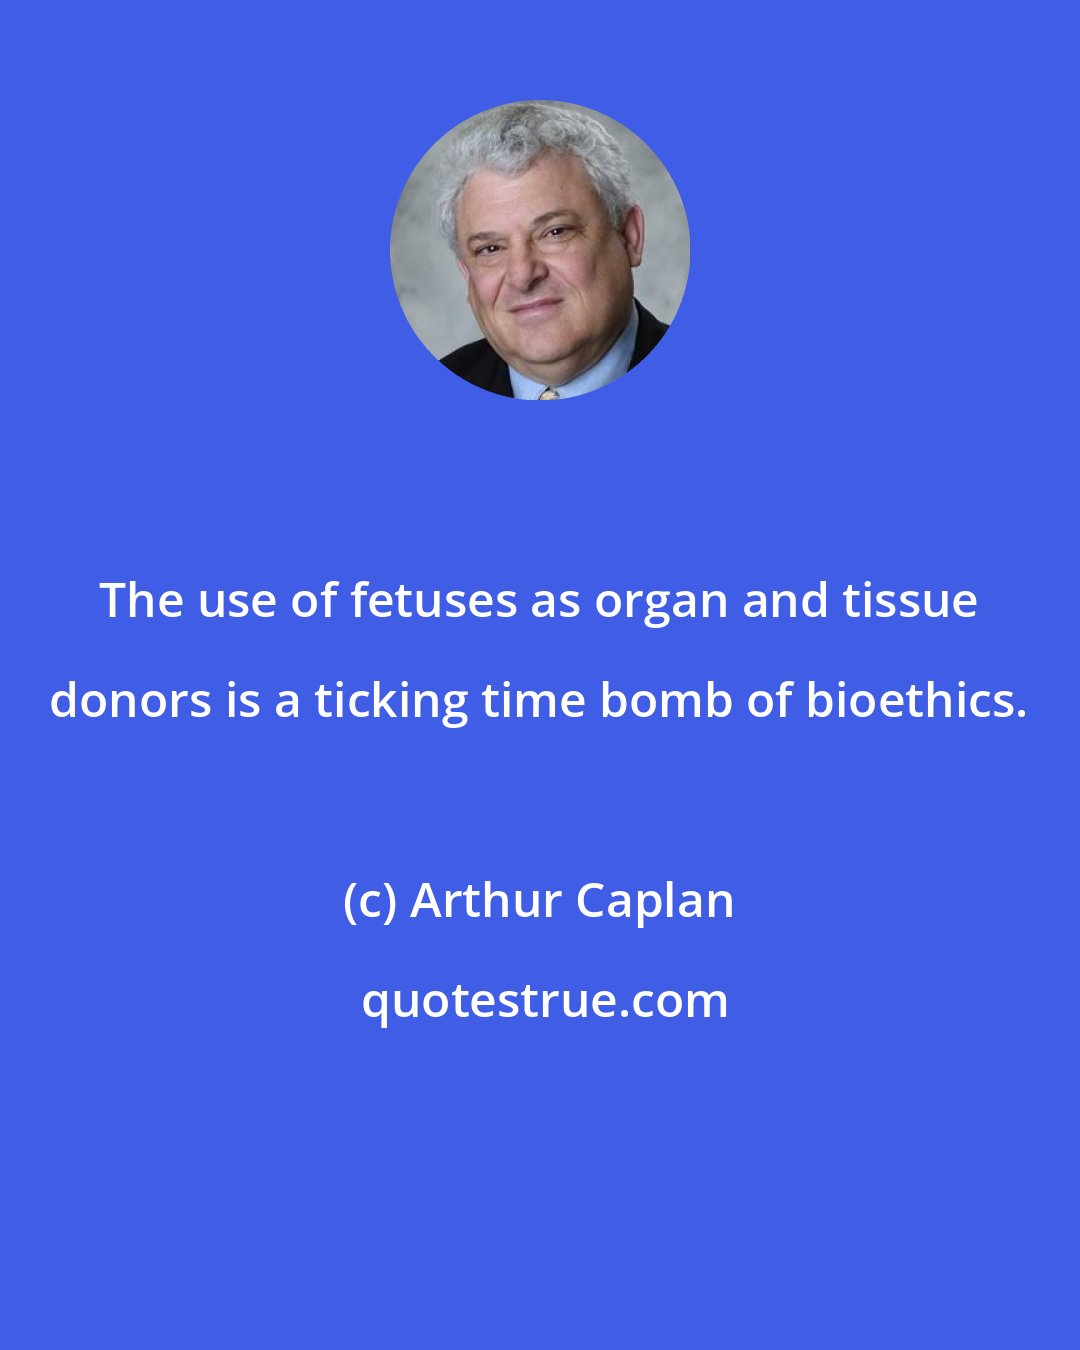 Arthur Caplan: The use of fetuses as organ and tissue donors is a ticking time bomb of bioethics.